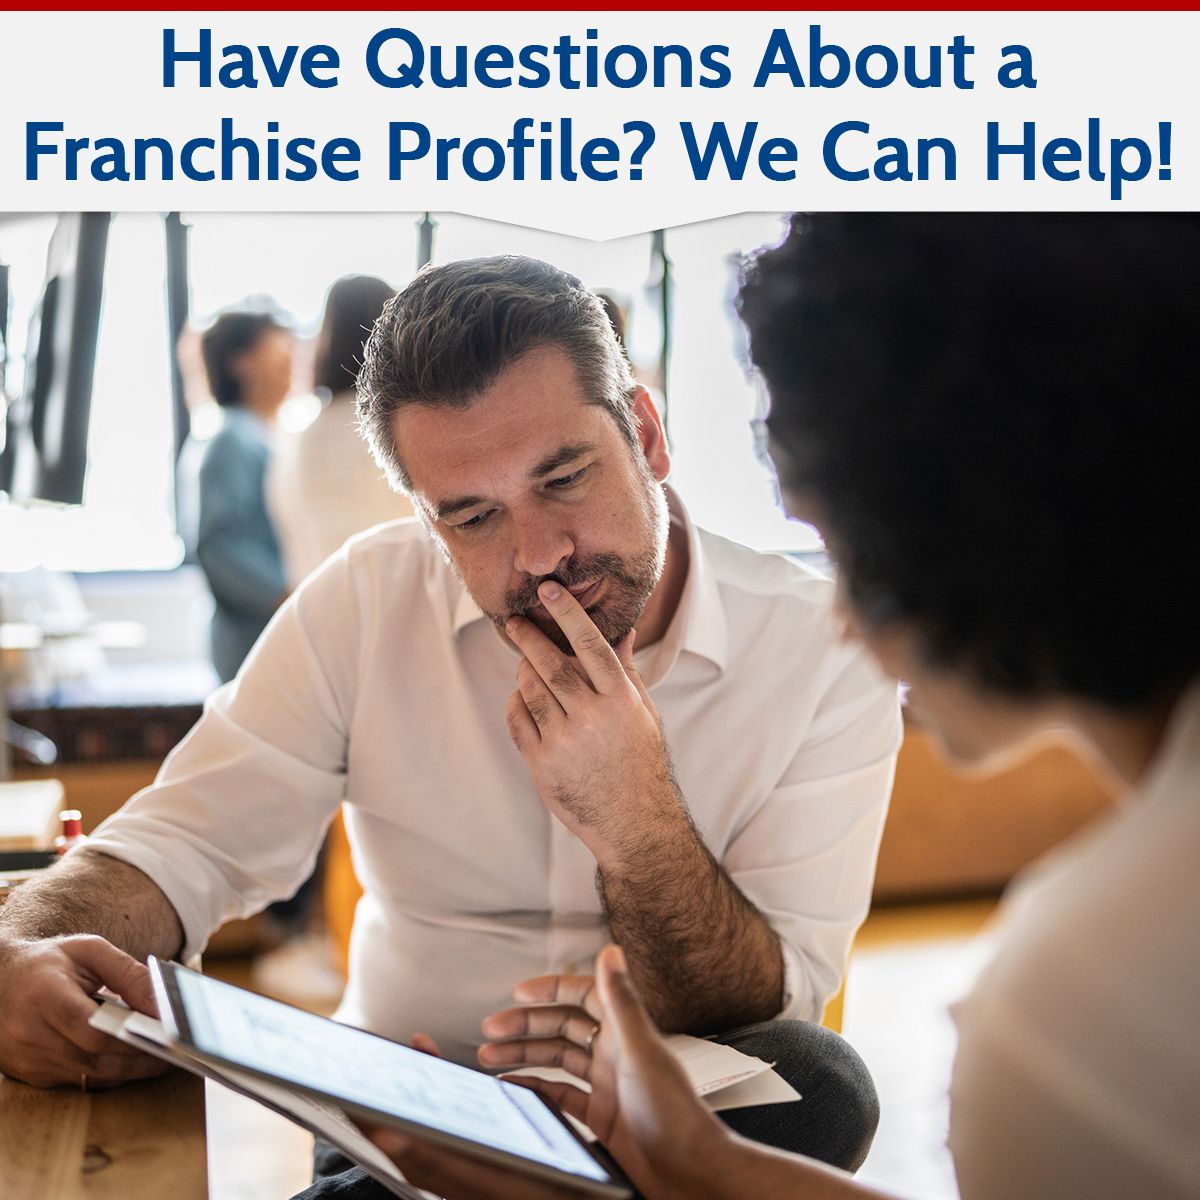 Have Questions About a Franchise Profile? We Can Help!